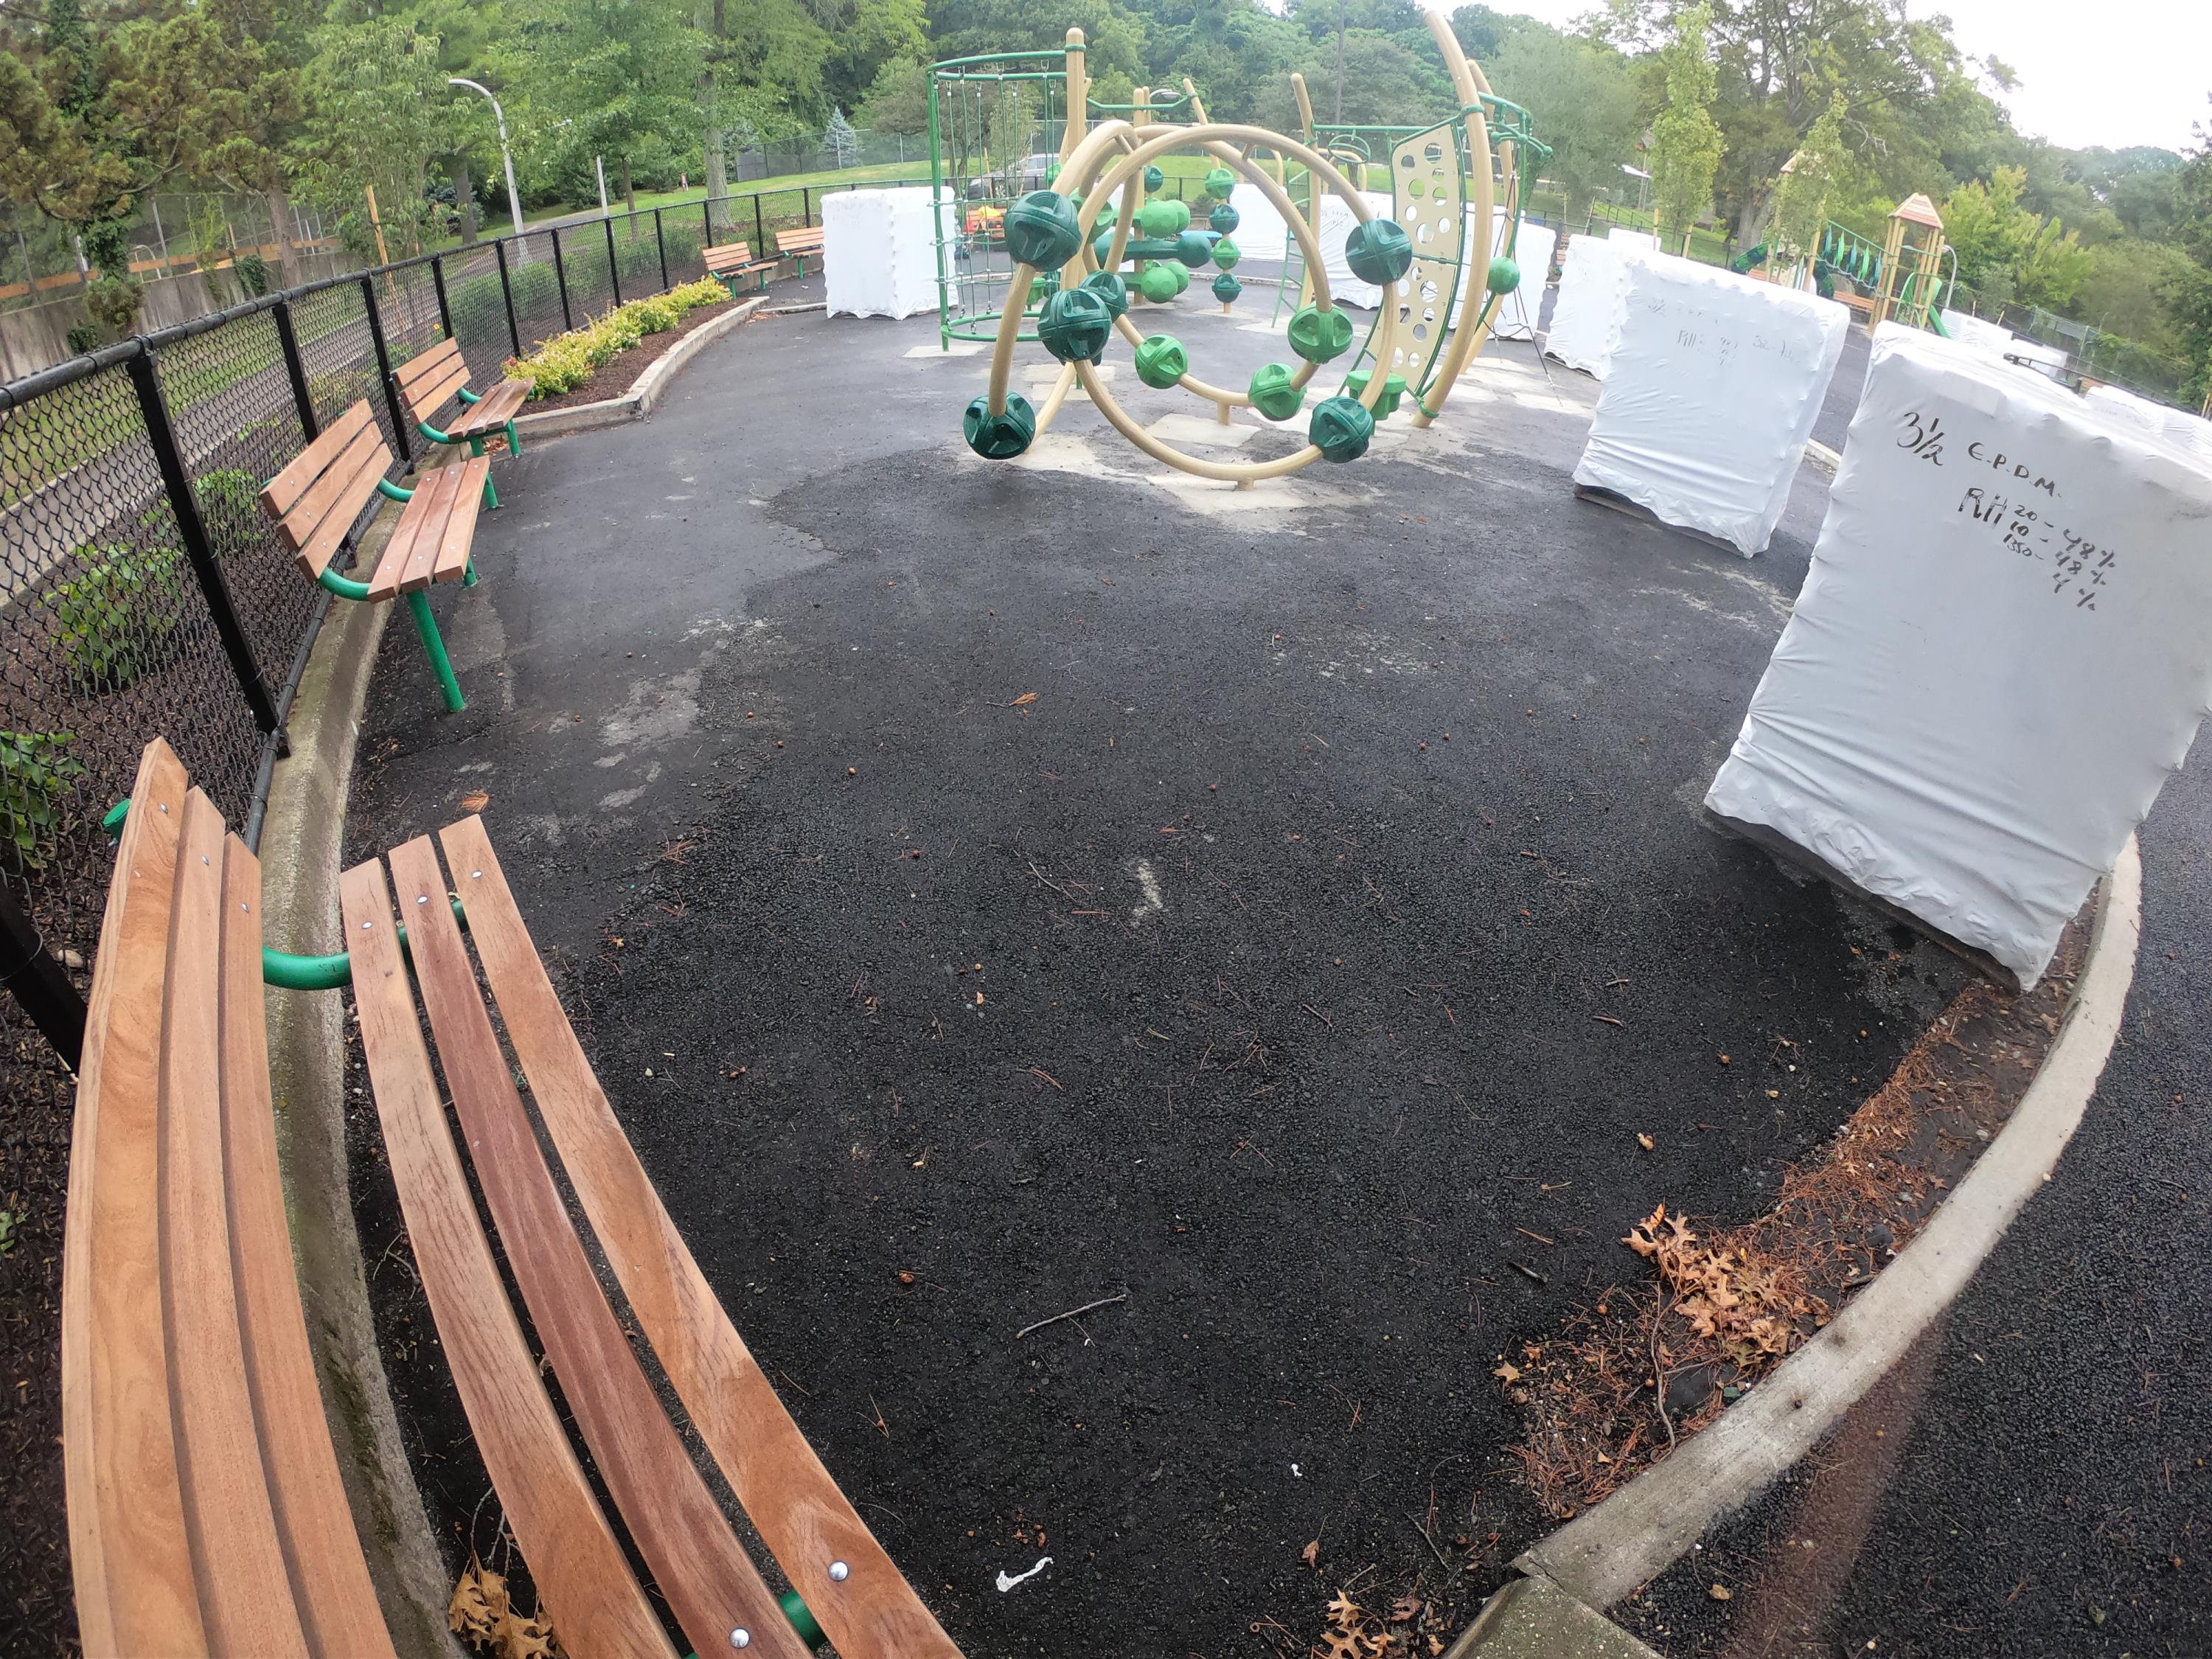 County Park Playground = Using TPV Top Tiles w50% Blue 45% Green 5% Black i